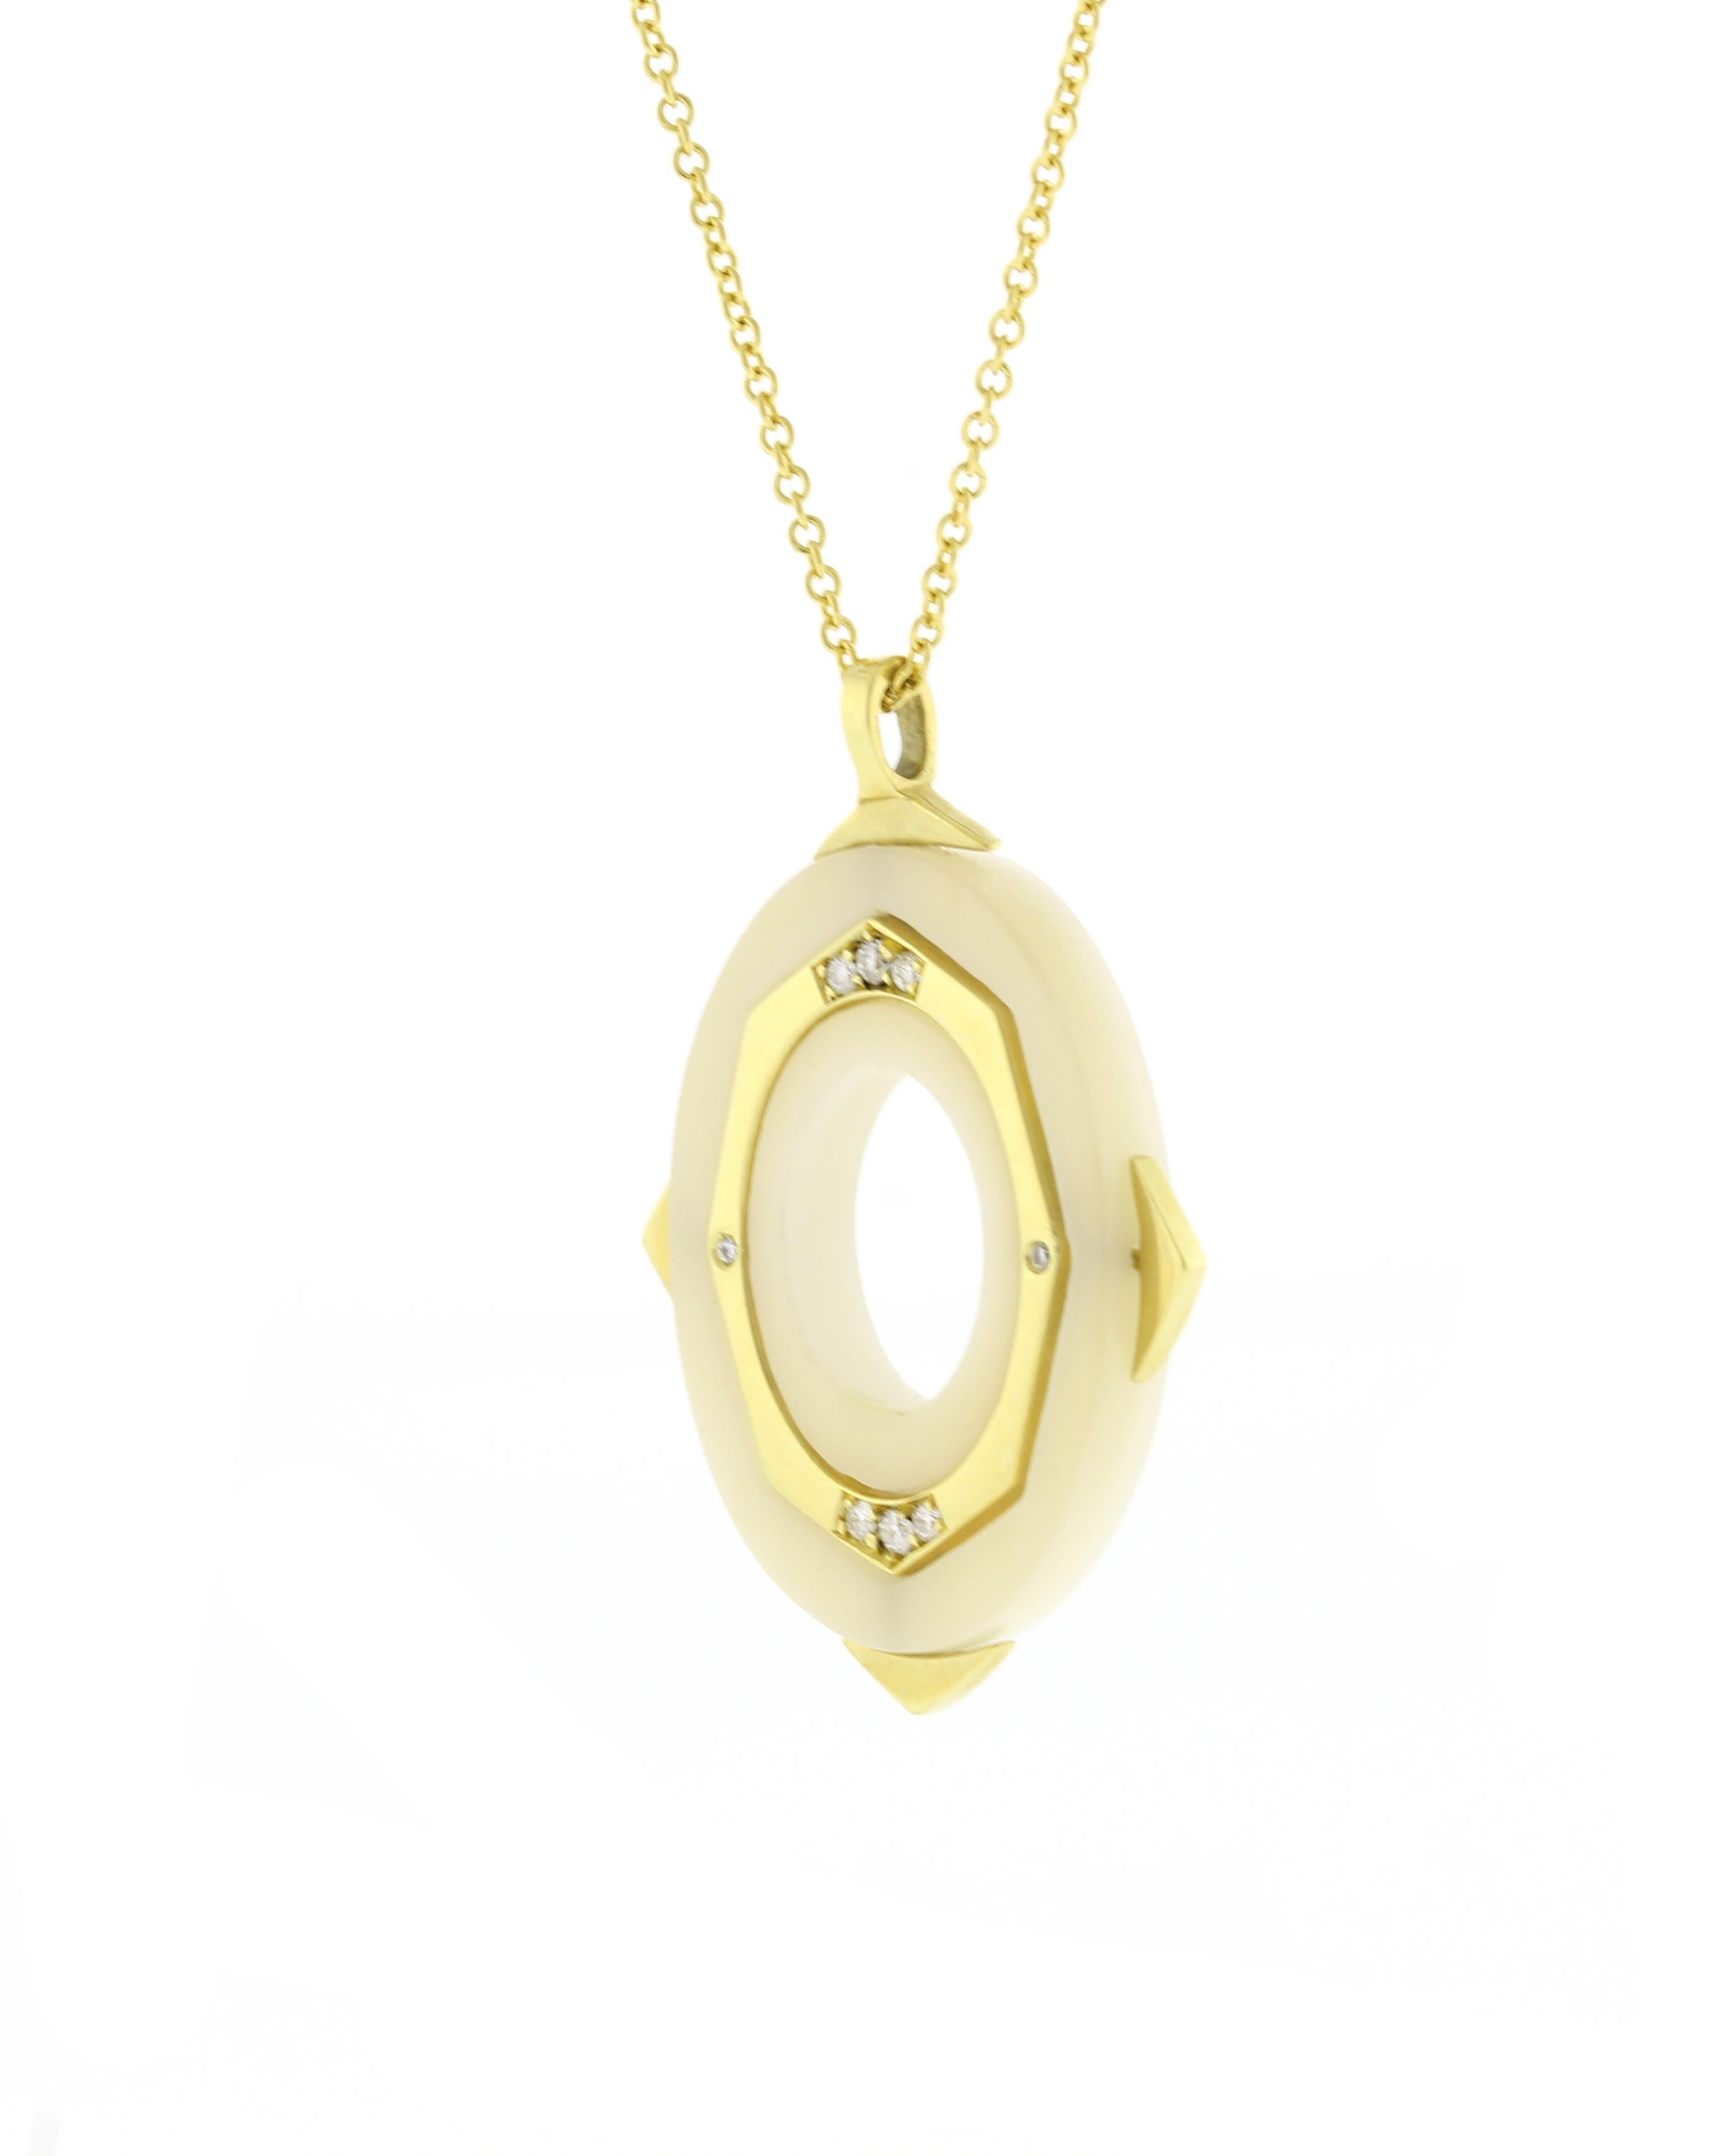 From Irthly by David Alvarado,  a Taqua Nut Palm Ivory Affinity Diamond  Pendant.  Palm Ivory is carved from the Taqua nut also know as vegetable ivory.  A sustainable nut that resembles animal Ivory that can be sustainably grown and harvested
♦